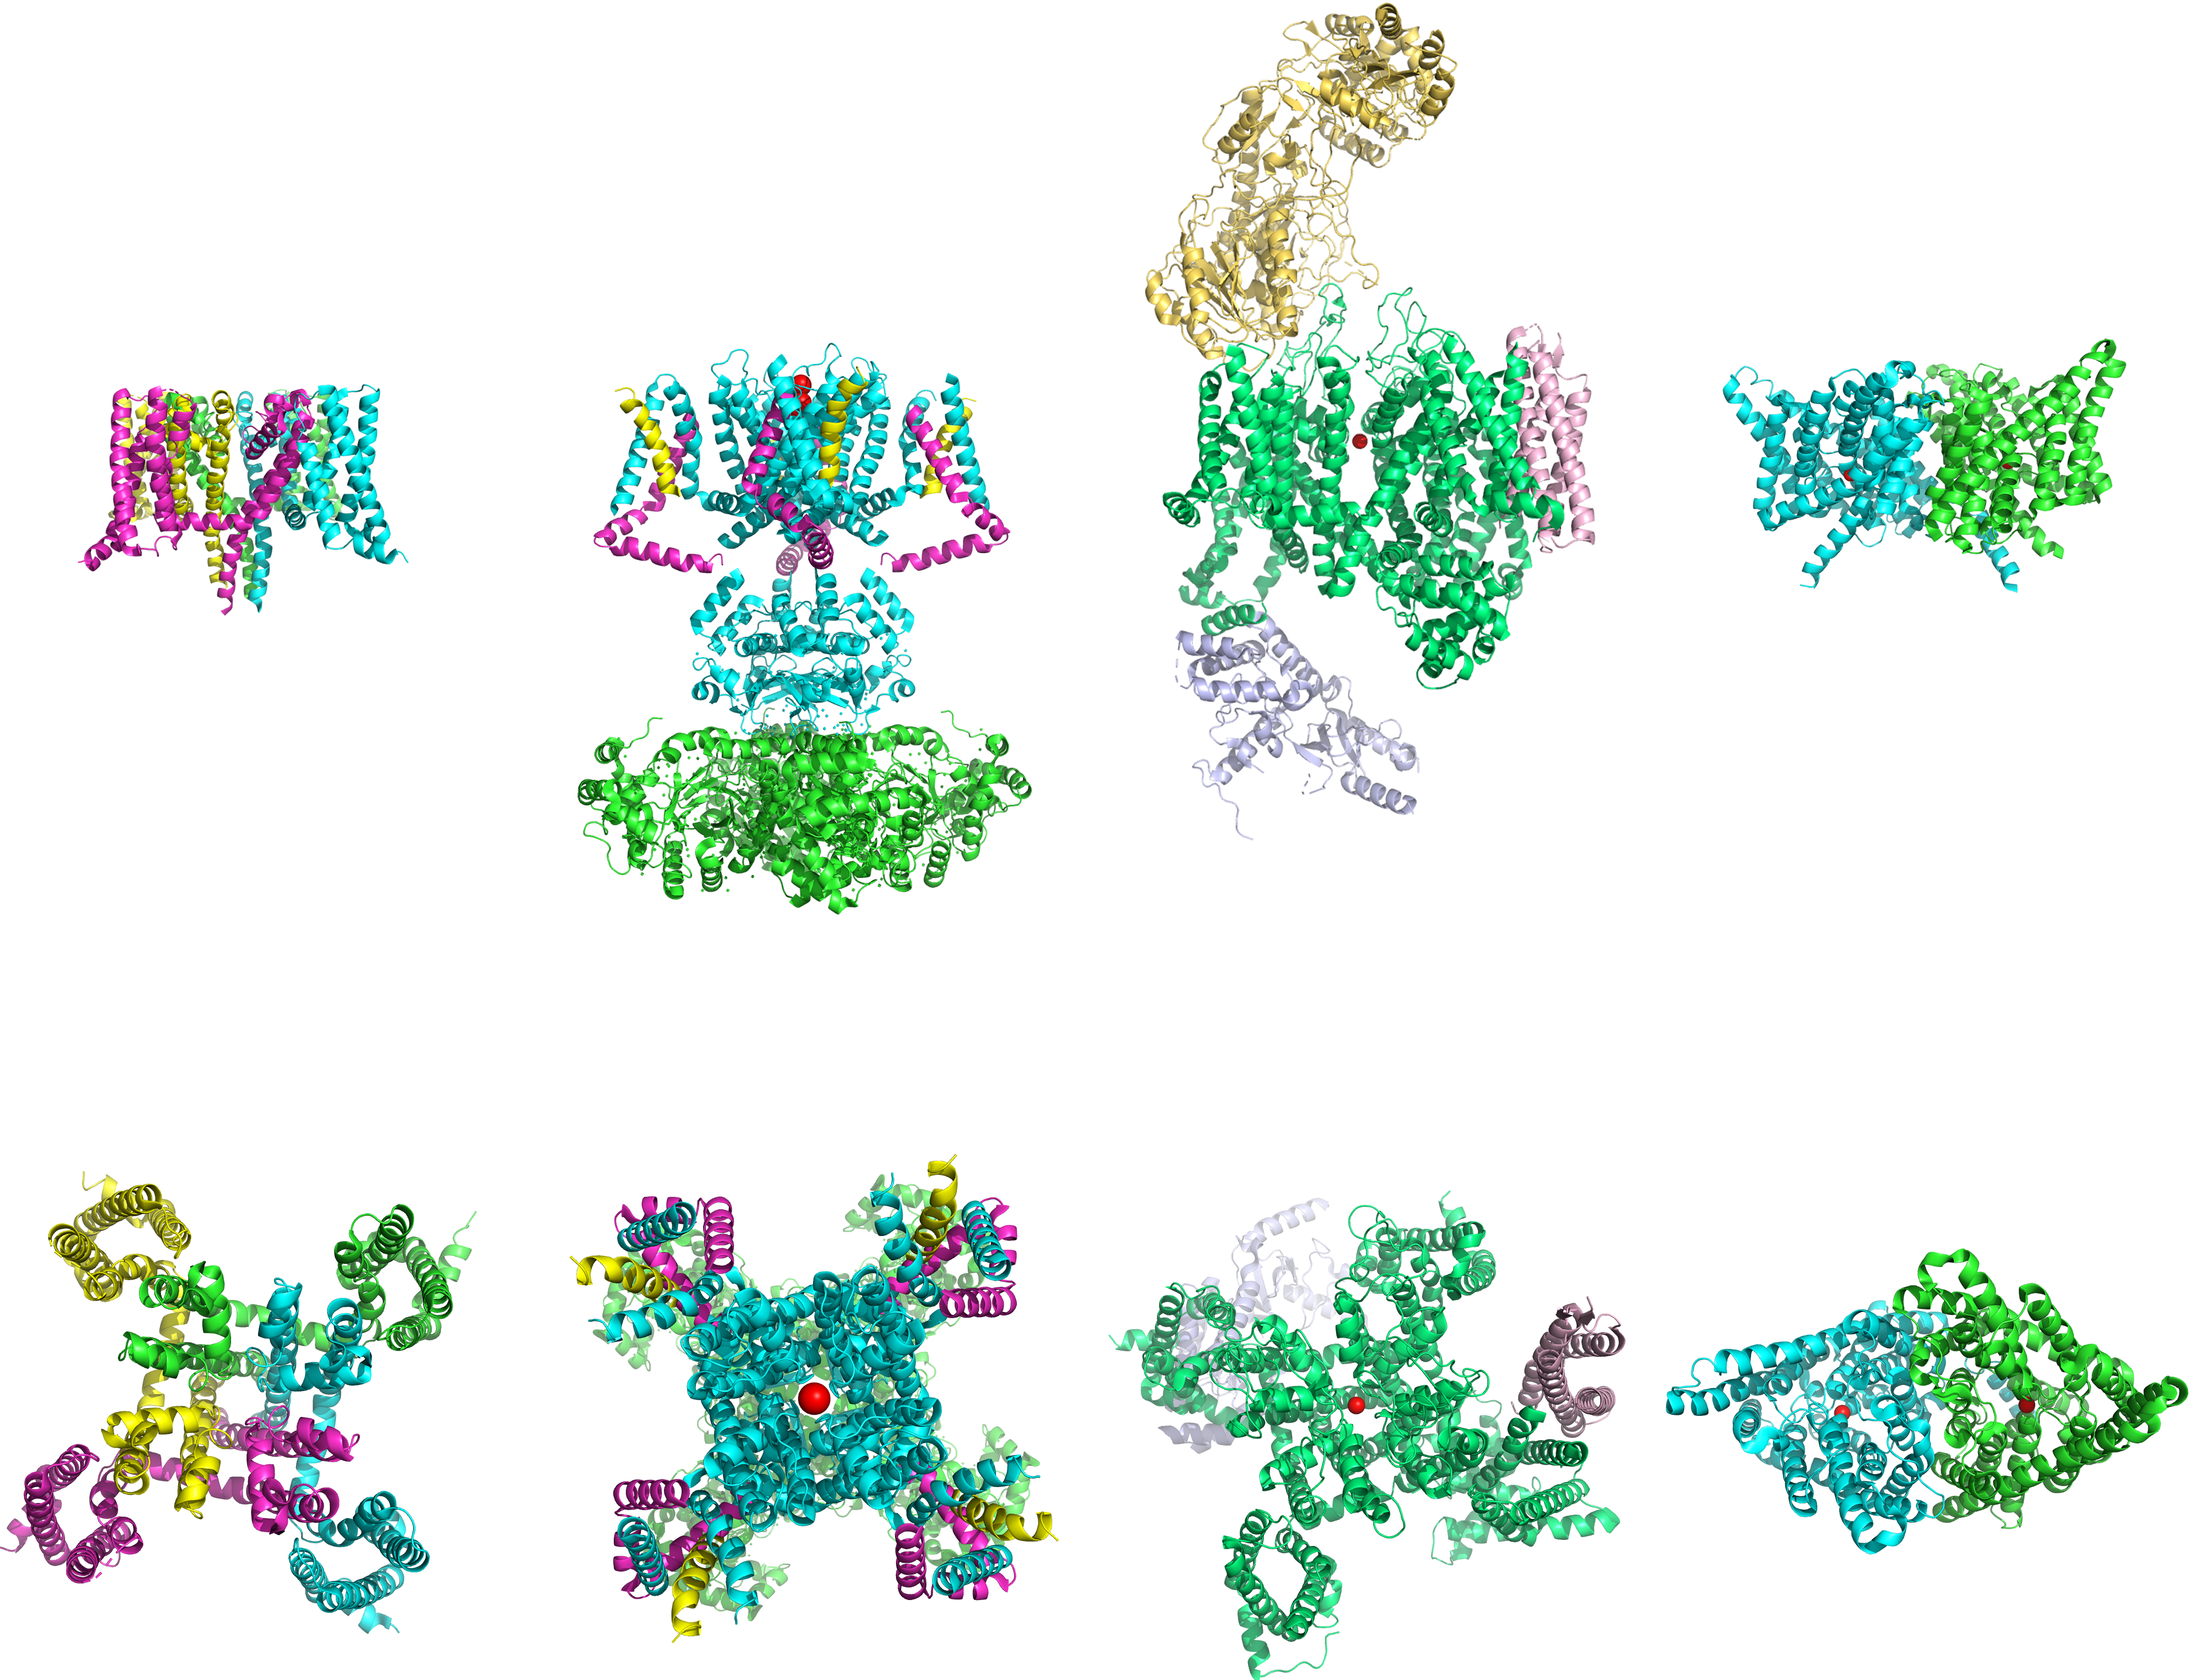 The structures (from left to right) of voltage-gated sodium, potassium, calcium and chloride channels. Top: side view; bottom: top view. Data from PDB 5EK0, PDB 2A79, PDB 3JBR and PDB 1KPL rendered with open source molecular visualization tool PyMol.